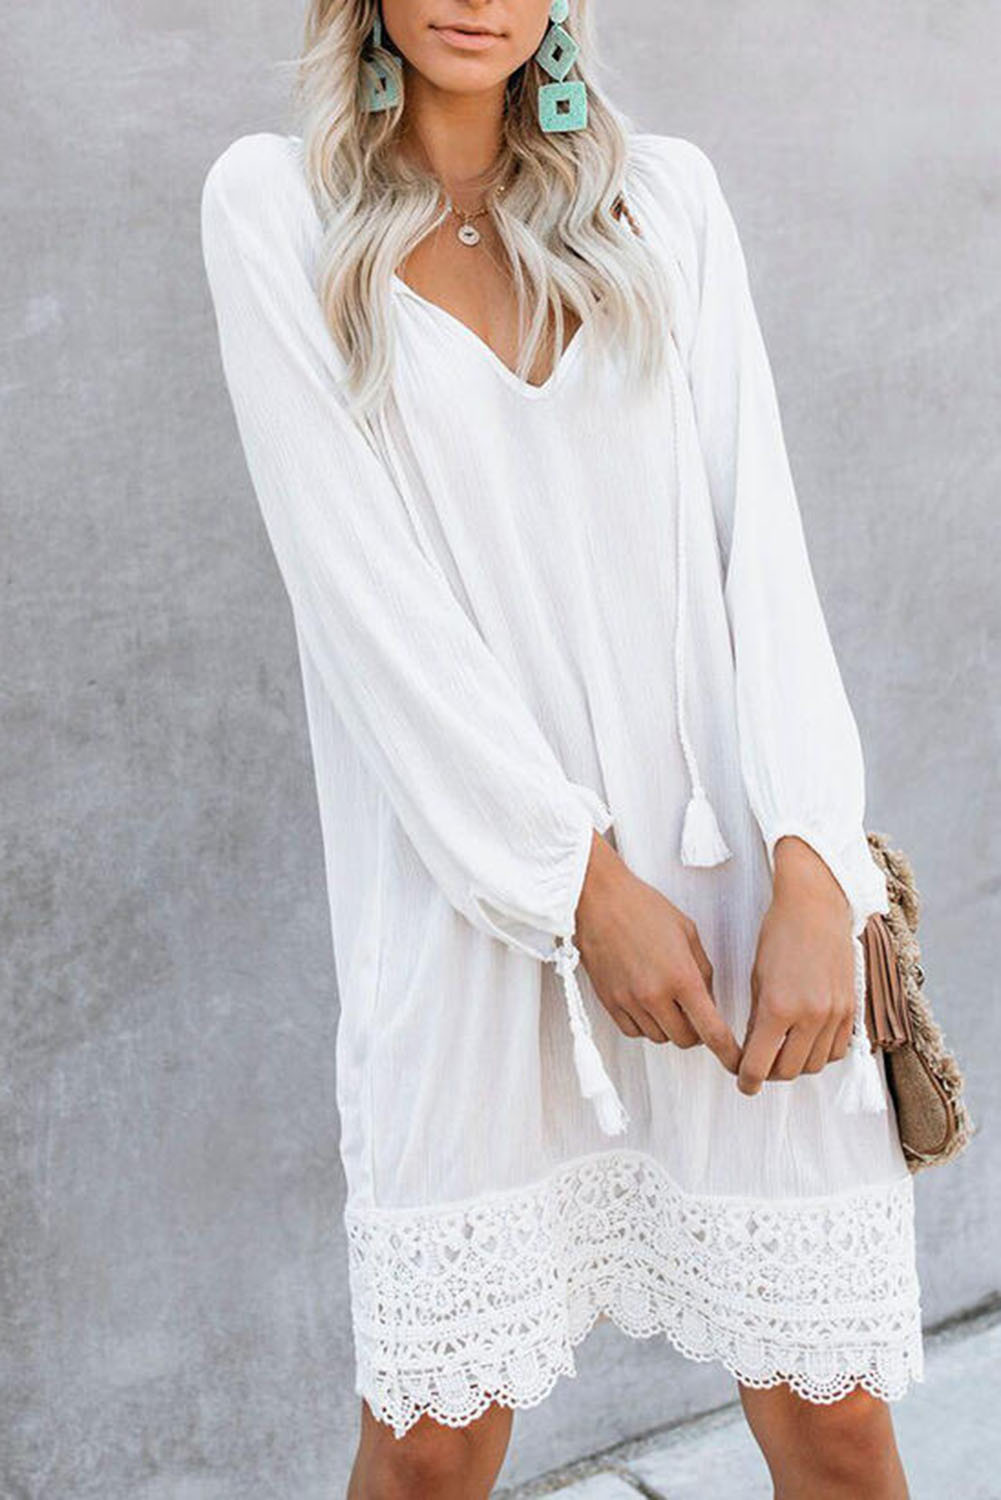 Wholesale Push it production, Cheap White Lace V Neck Bishop Sleeves ...